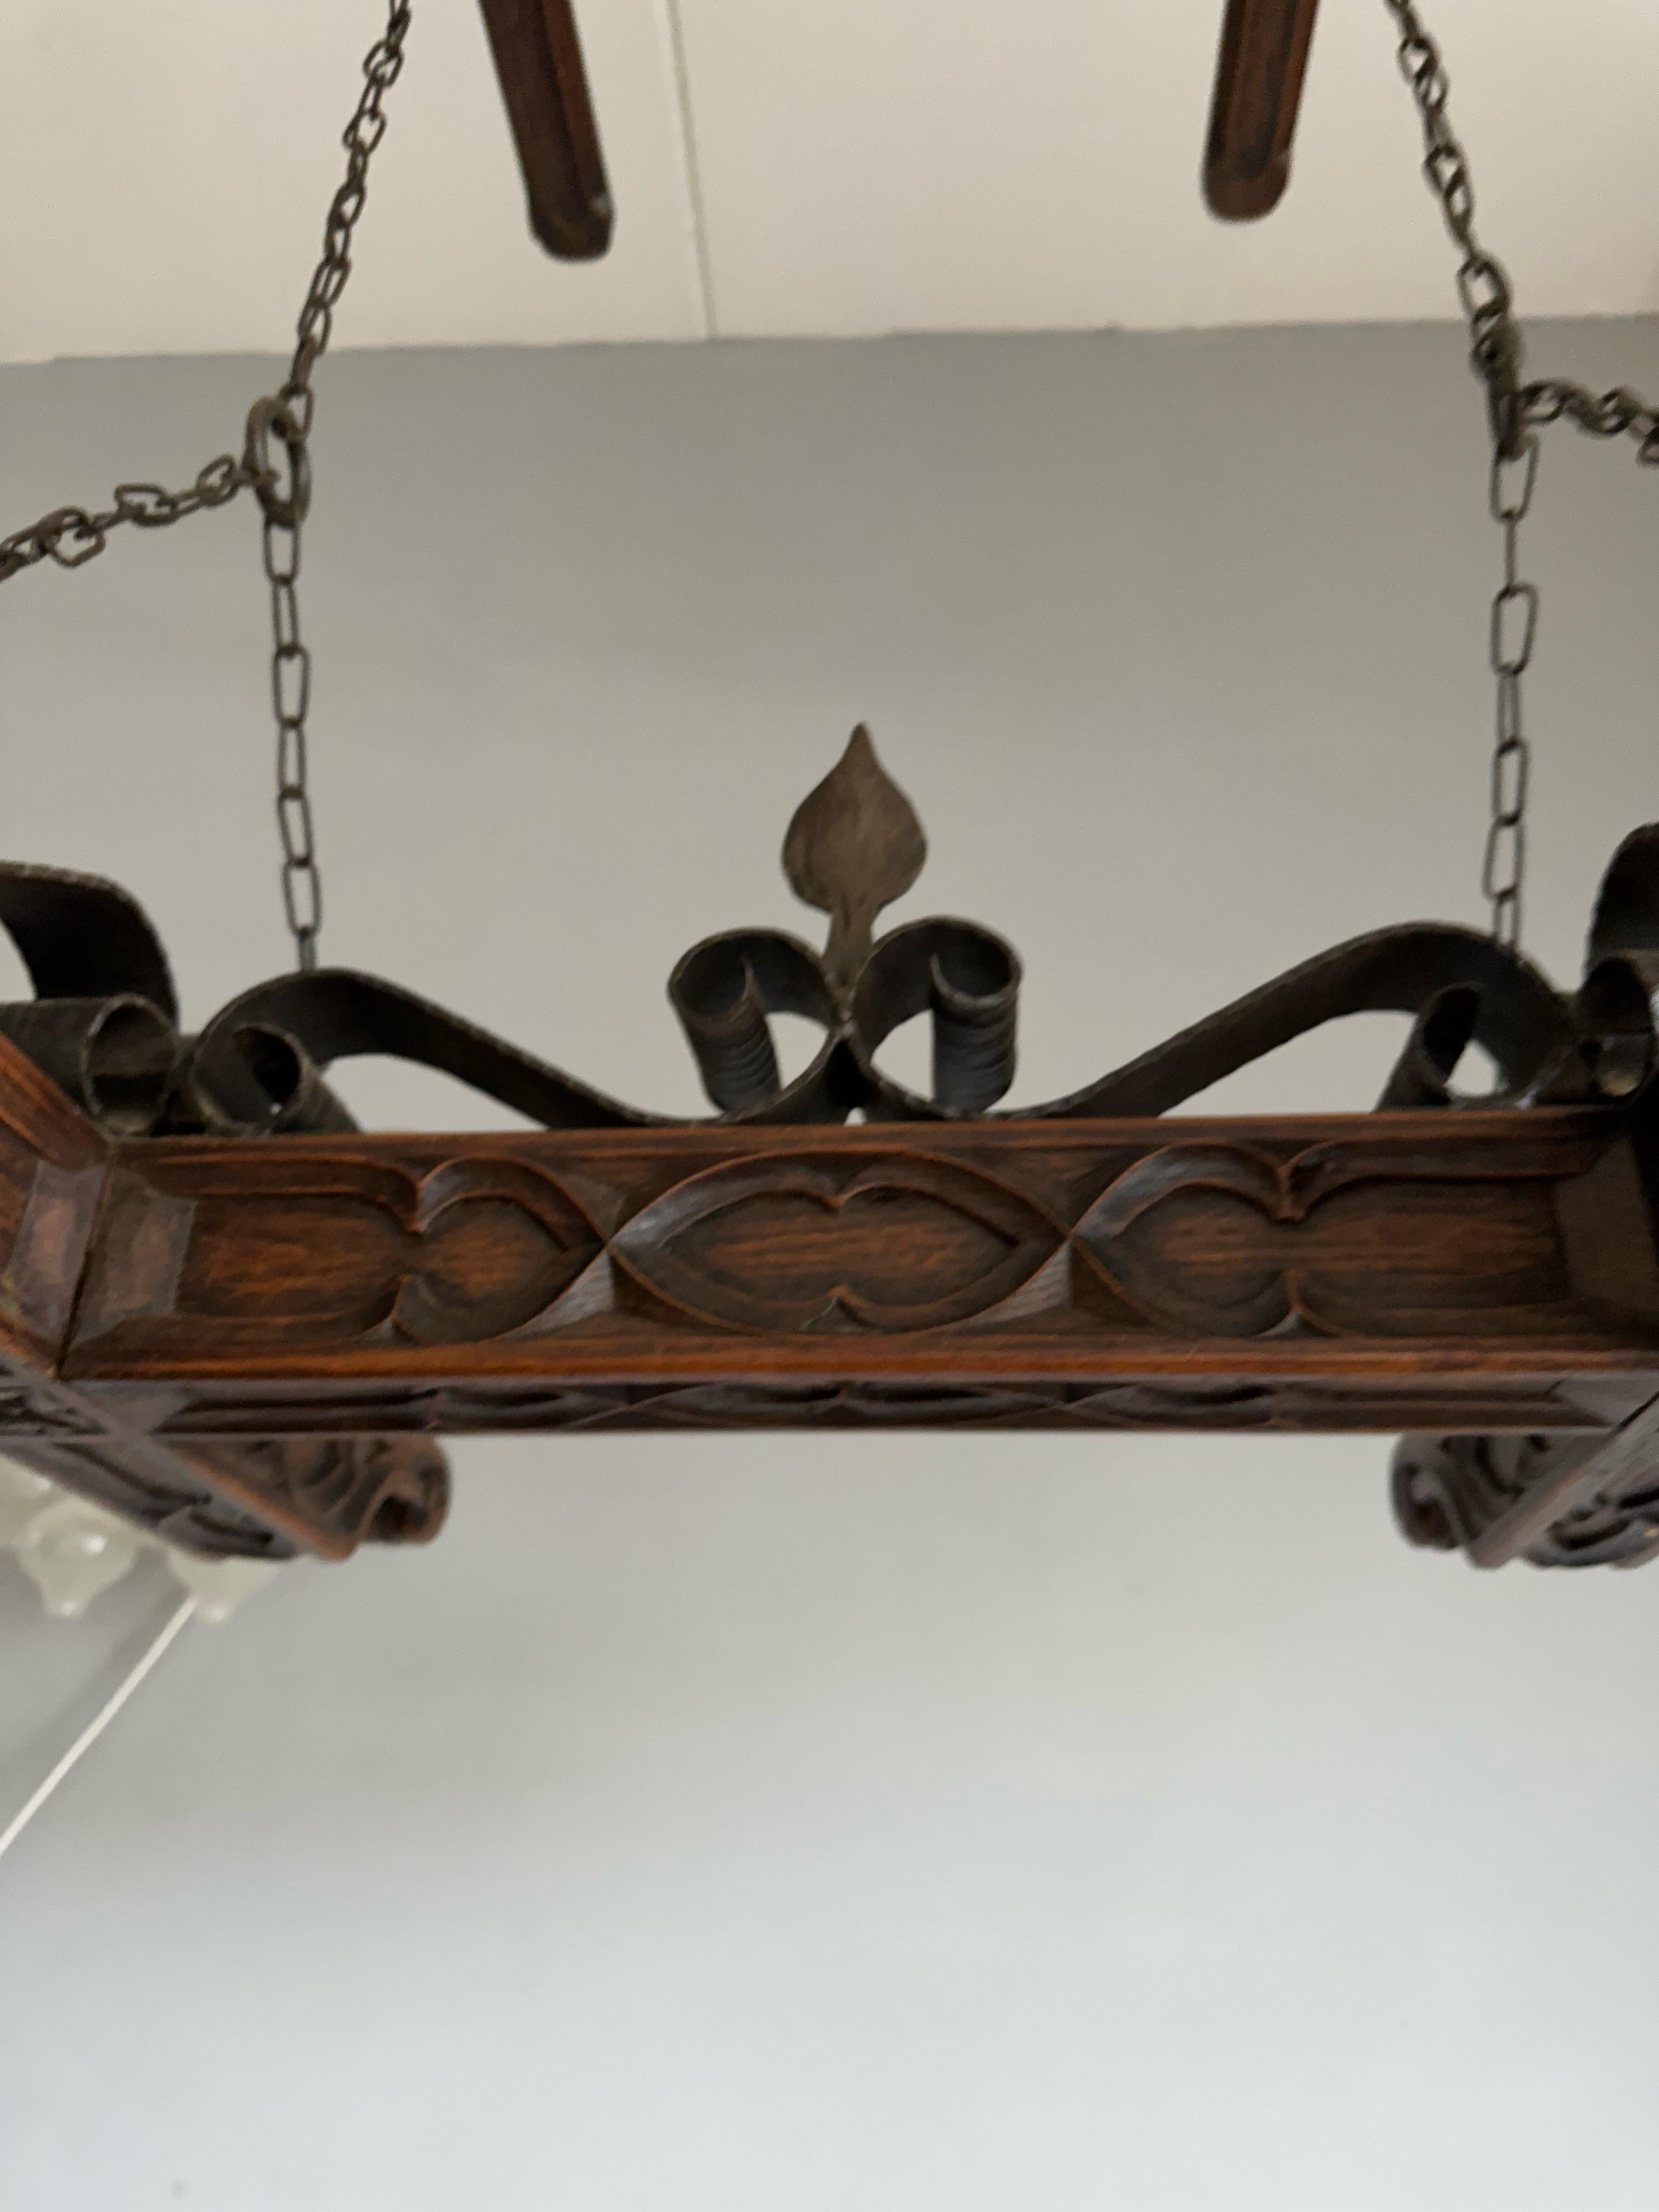 Rare Handcrafted Oak and Iron Gothic Revival Church Pendant Light / Chandelier For Sale 8